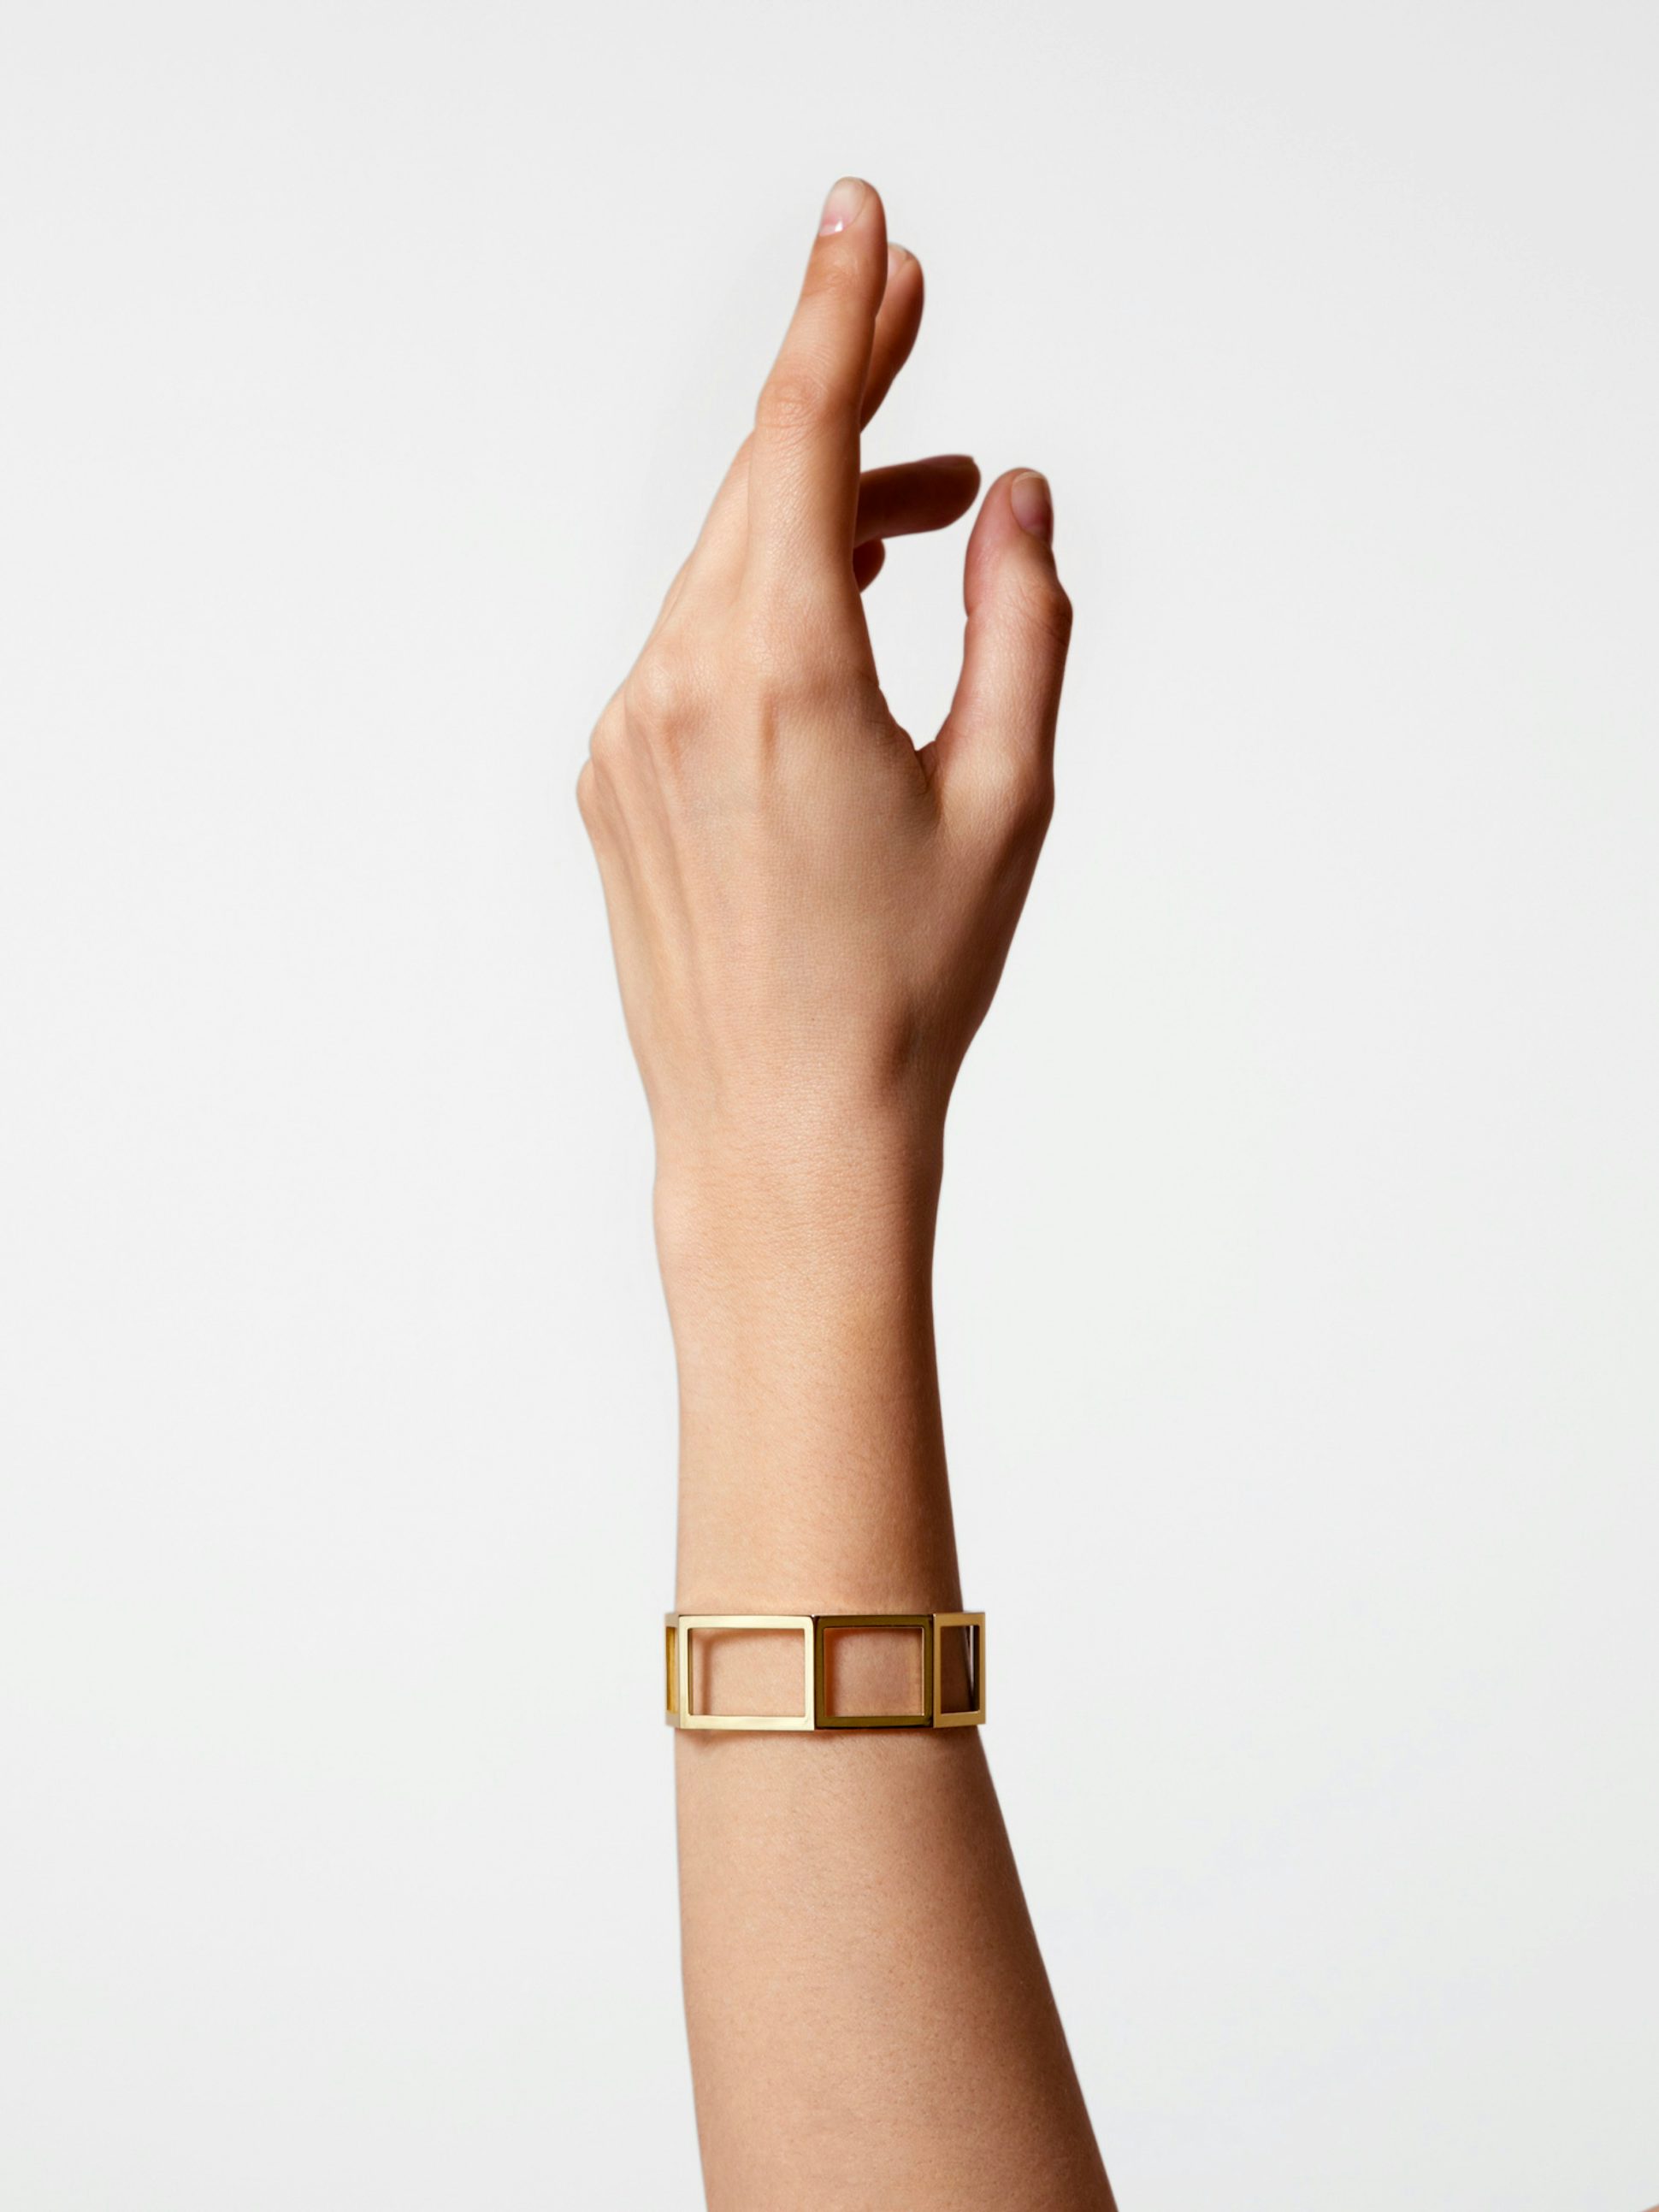 Octogone cuff in 18k Fairmined ethical yellow gold (20mm wide)